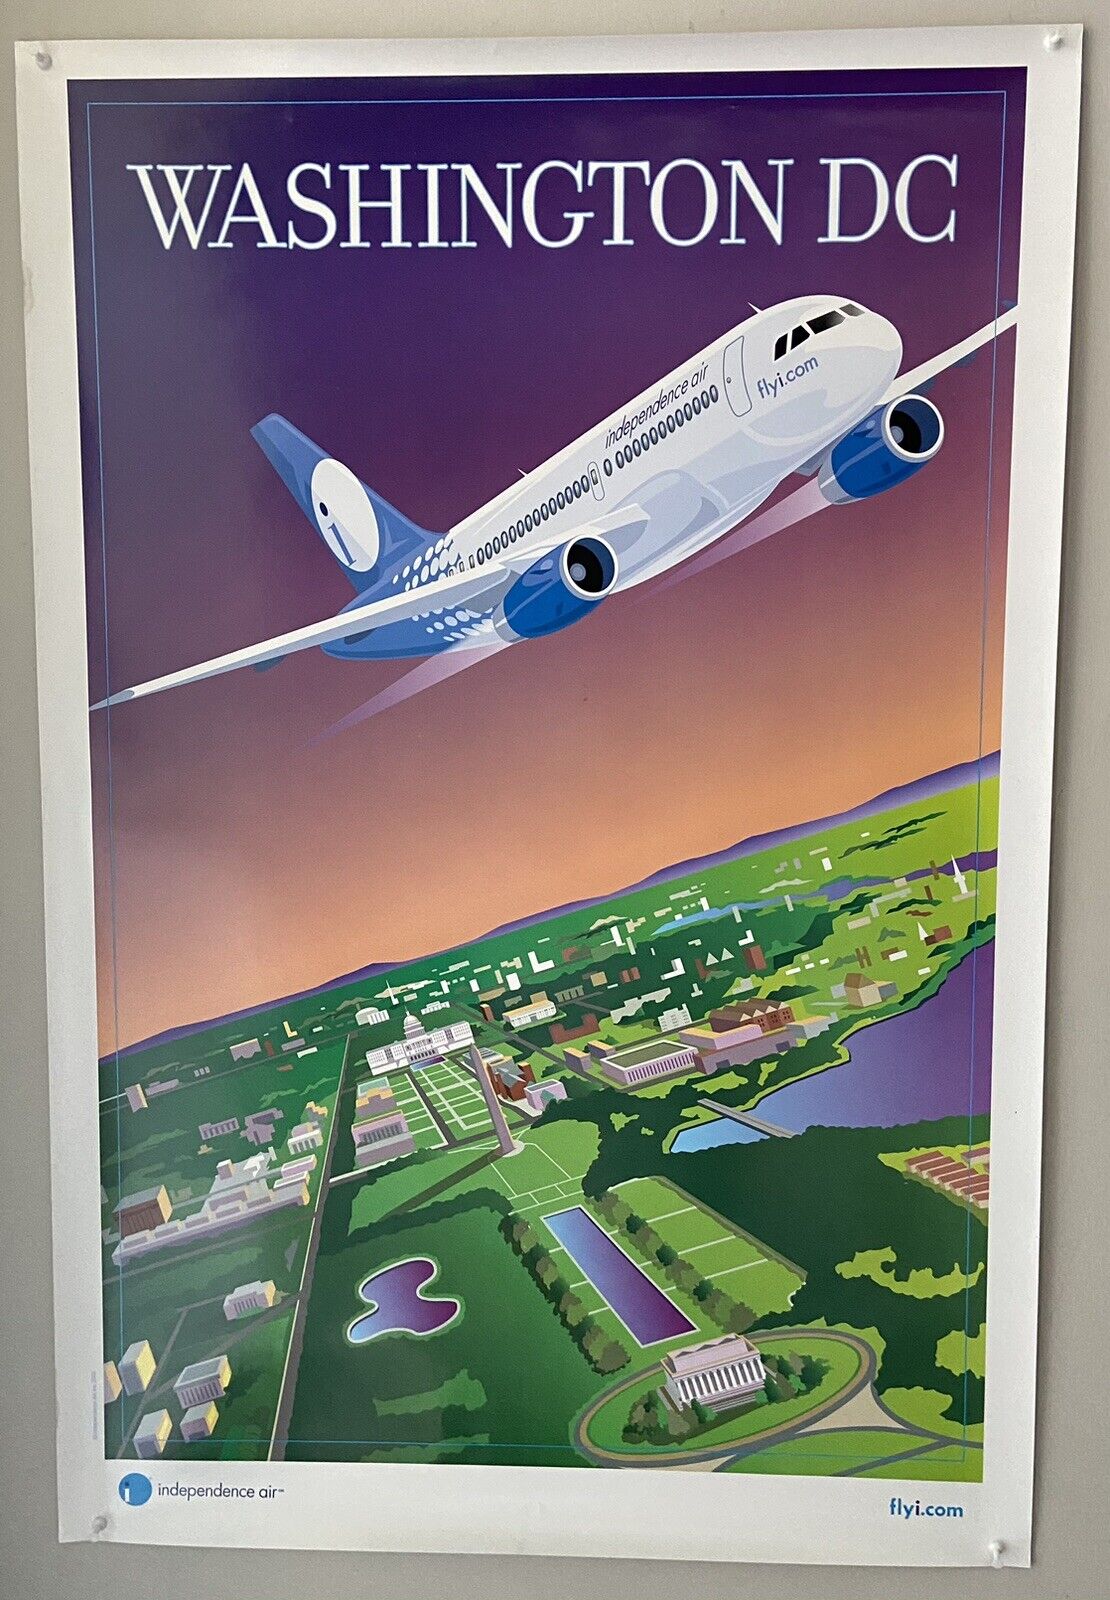 Out Of Business Independence Airlines  2005 Poster. Washington D.C.  20Lx13-1/2